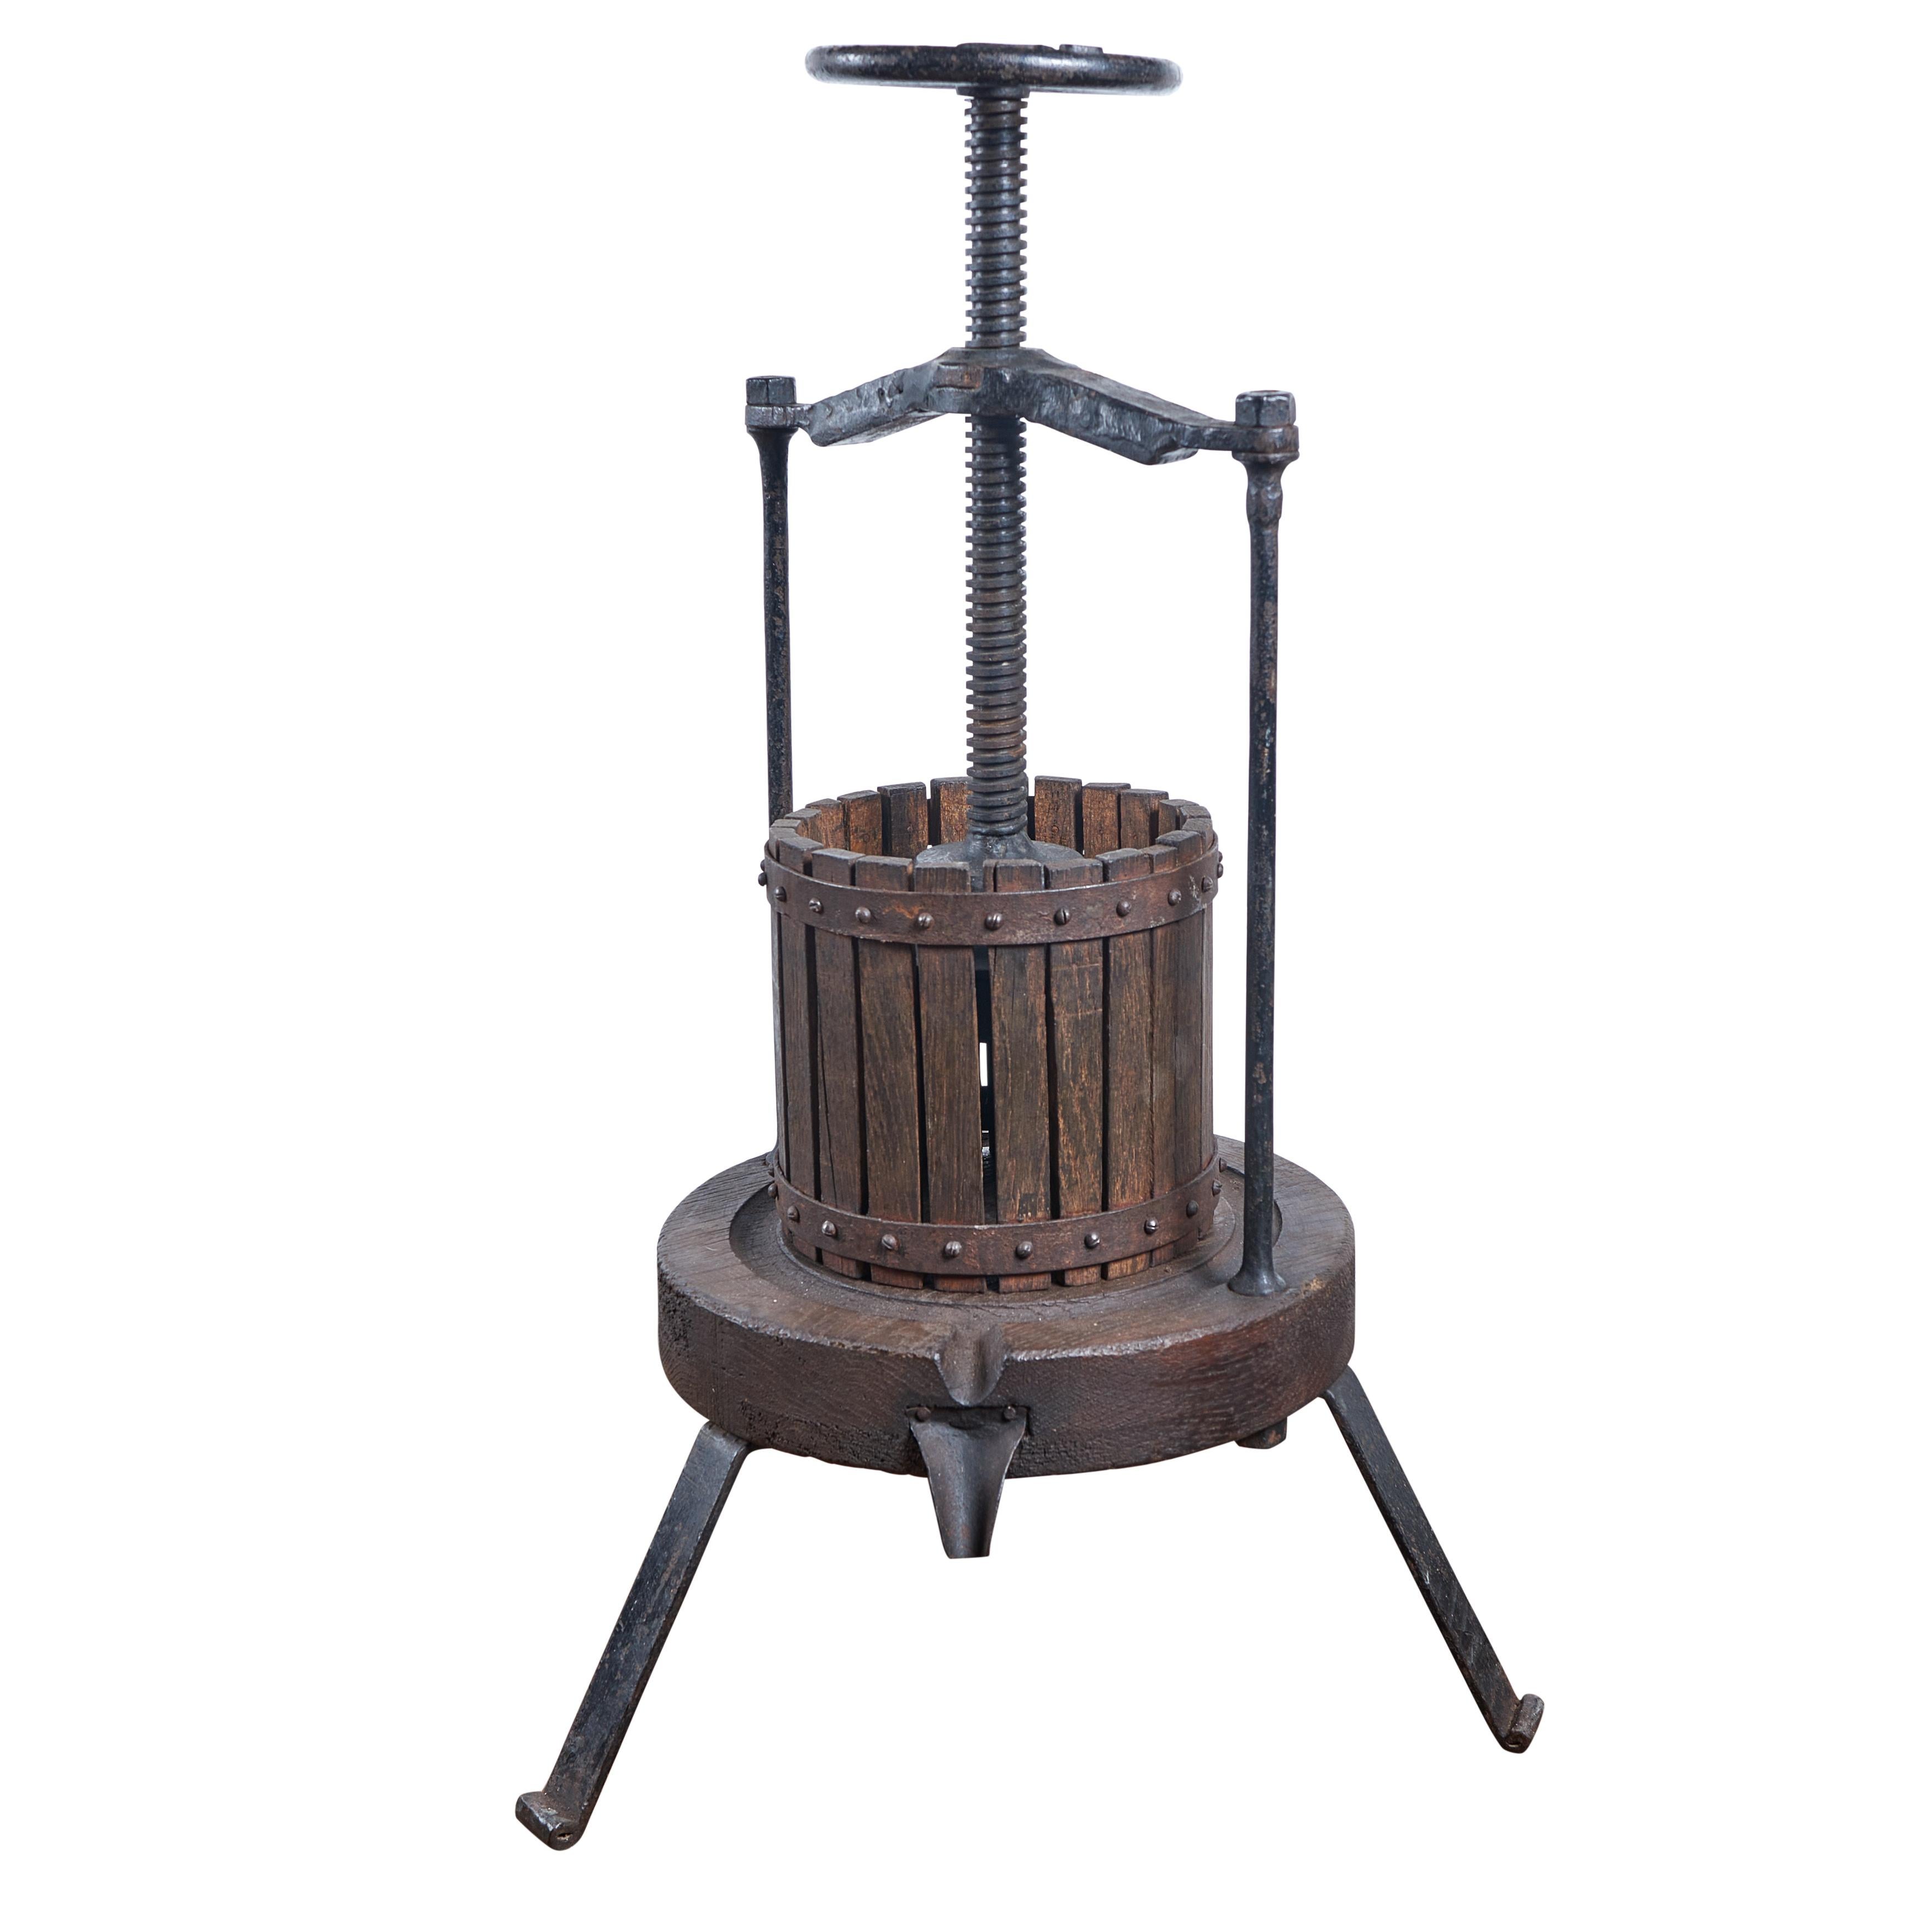 Wood and Iron Grape Press for wine making. All original.